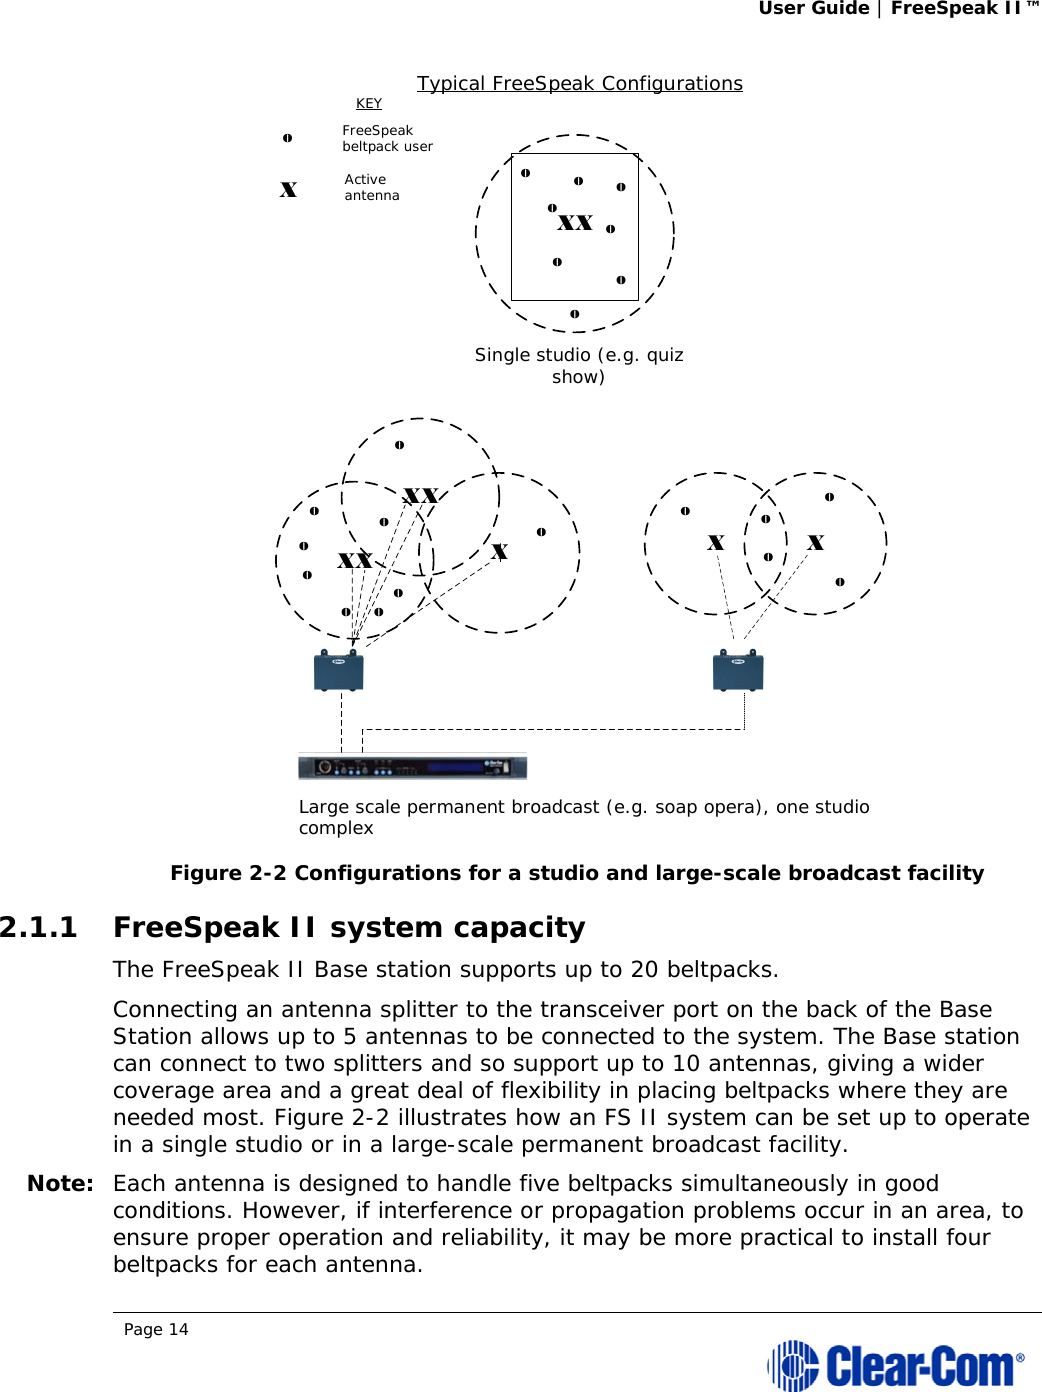 User Guide | FreeSpeak II™  Page 14   Figure 2-2 Configurations for a studio and large-scale broadcast facility 2.1.1 FreeSpeak II system capacity The FreeSpeak II Base station supports up to 20 beltpacks.  Connecting an antenna splitter to the transceiver port on the back of the Base Station allows up to 5 antennas to be connected to the system. The Base station can connect to two splitters and so support up to 10 antennas, giving a wider coverage area and a great deal of flexibility in placing beltpacks where they are needed most. Figure 2-2 illustrates how an FS II system can be set up to operate in a single studio or in a large-scale permanent broadcast facility. Note: Each antenna is designed to handle five beltpacks simultaneously in good conditions. However, if interference or propagation problems occur in an area, to ensure proper operation and reliability, it may be more practical to install four beltpacks for each antenna. XXOOOOOOOOXXXXXXXOOOOOOOOOOOOOOOSingle studio (e.g. quiz show)Large scale permanent broadcast (e.g. soap opera), one studio complexXTypical FreeSpeak ConfigurationsFreeSpeak beltpack userActive antennaKEY